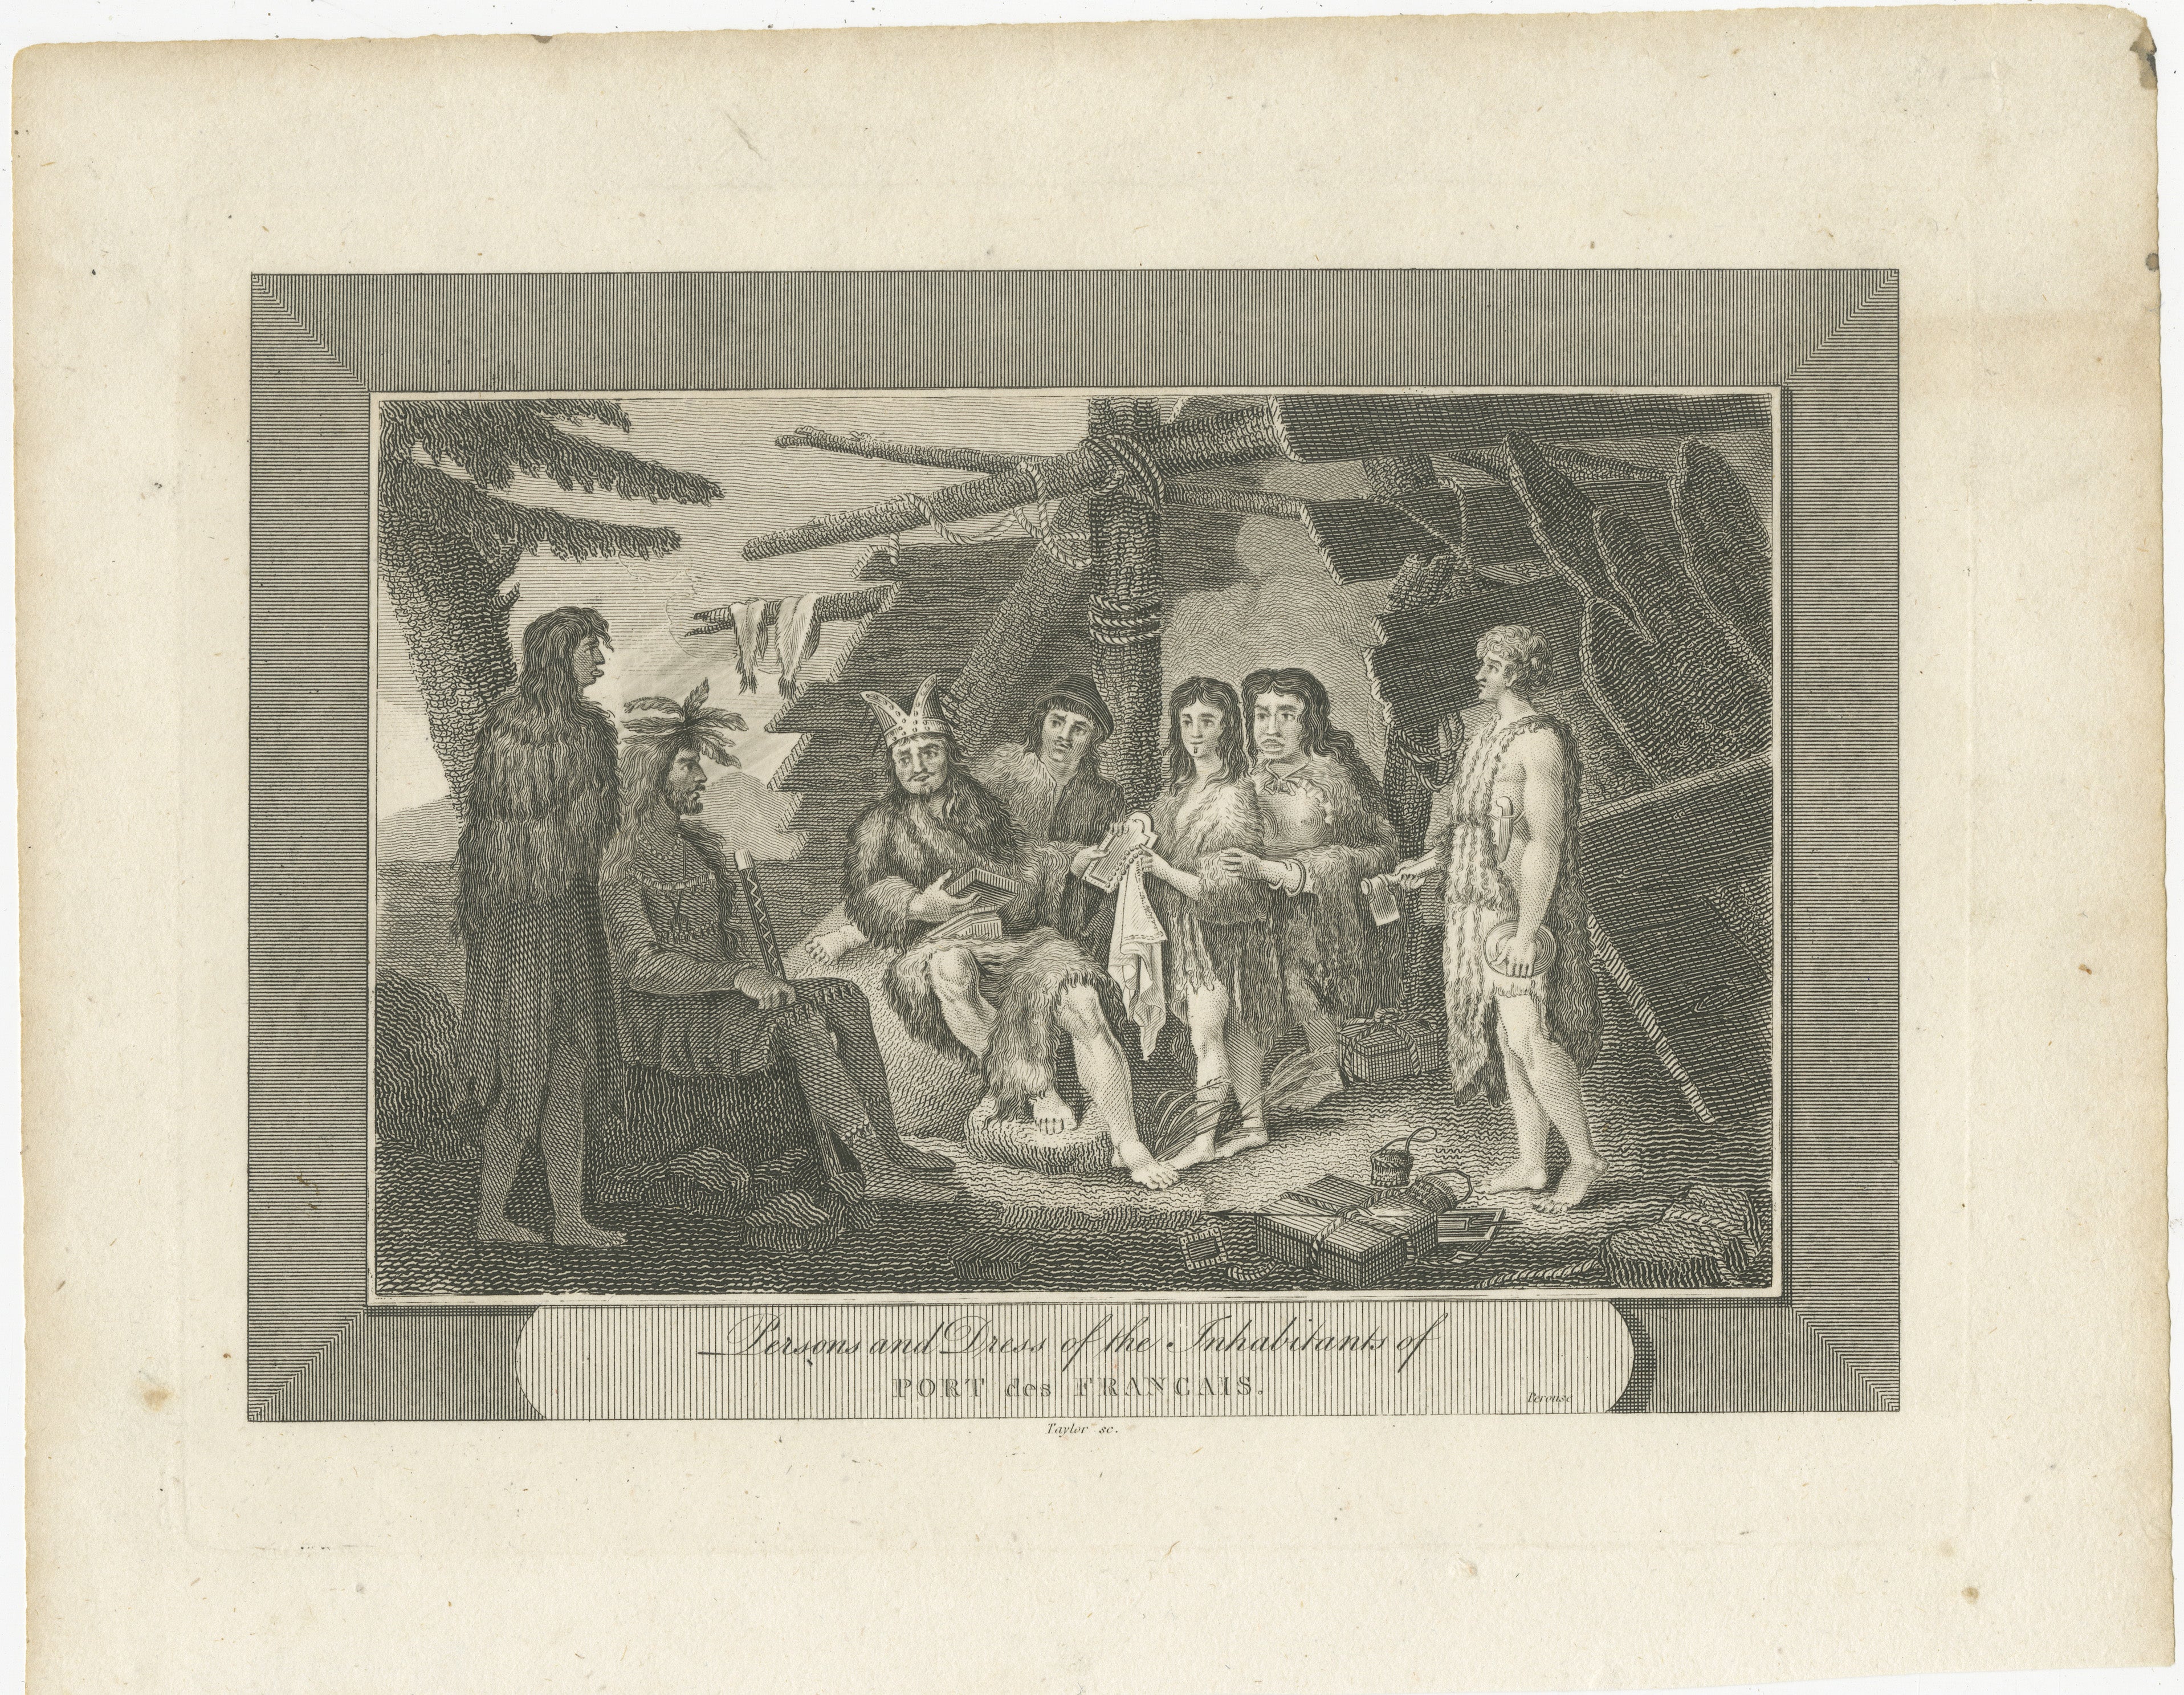 The uploaded authentic engraving for sale portrays a scene of interaction between European explorers and indigenous peoples, identified by the caption as occurring at 